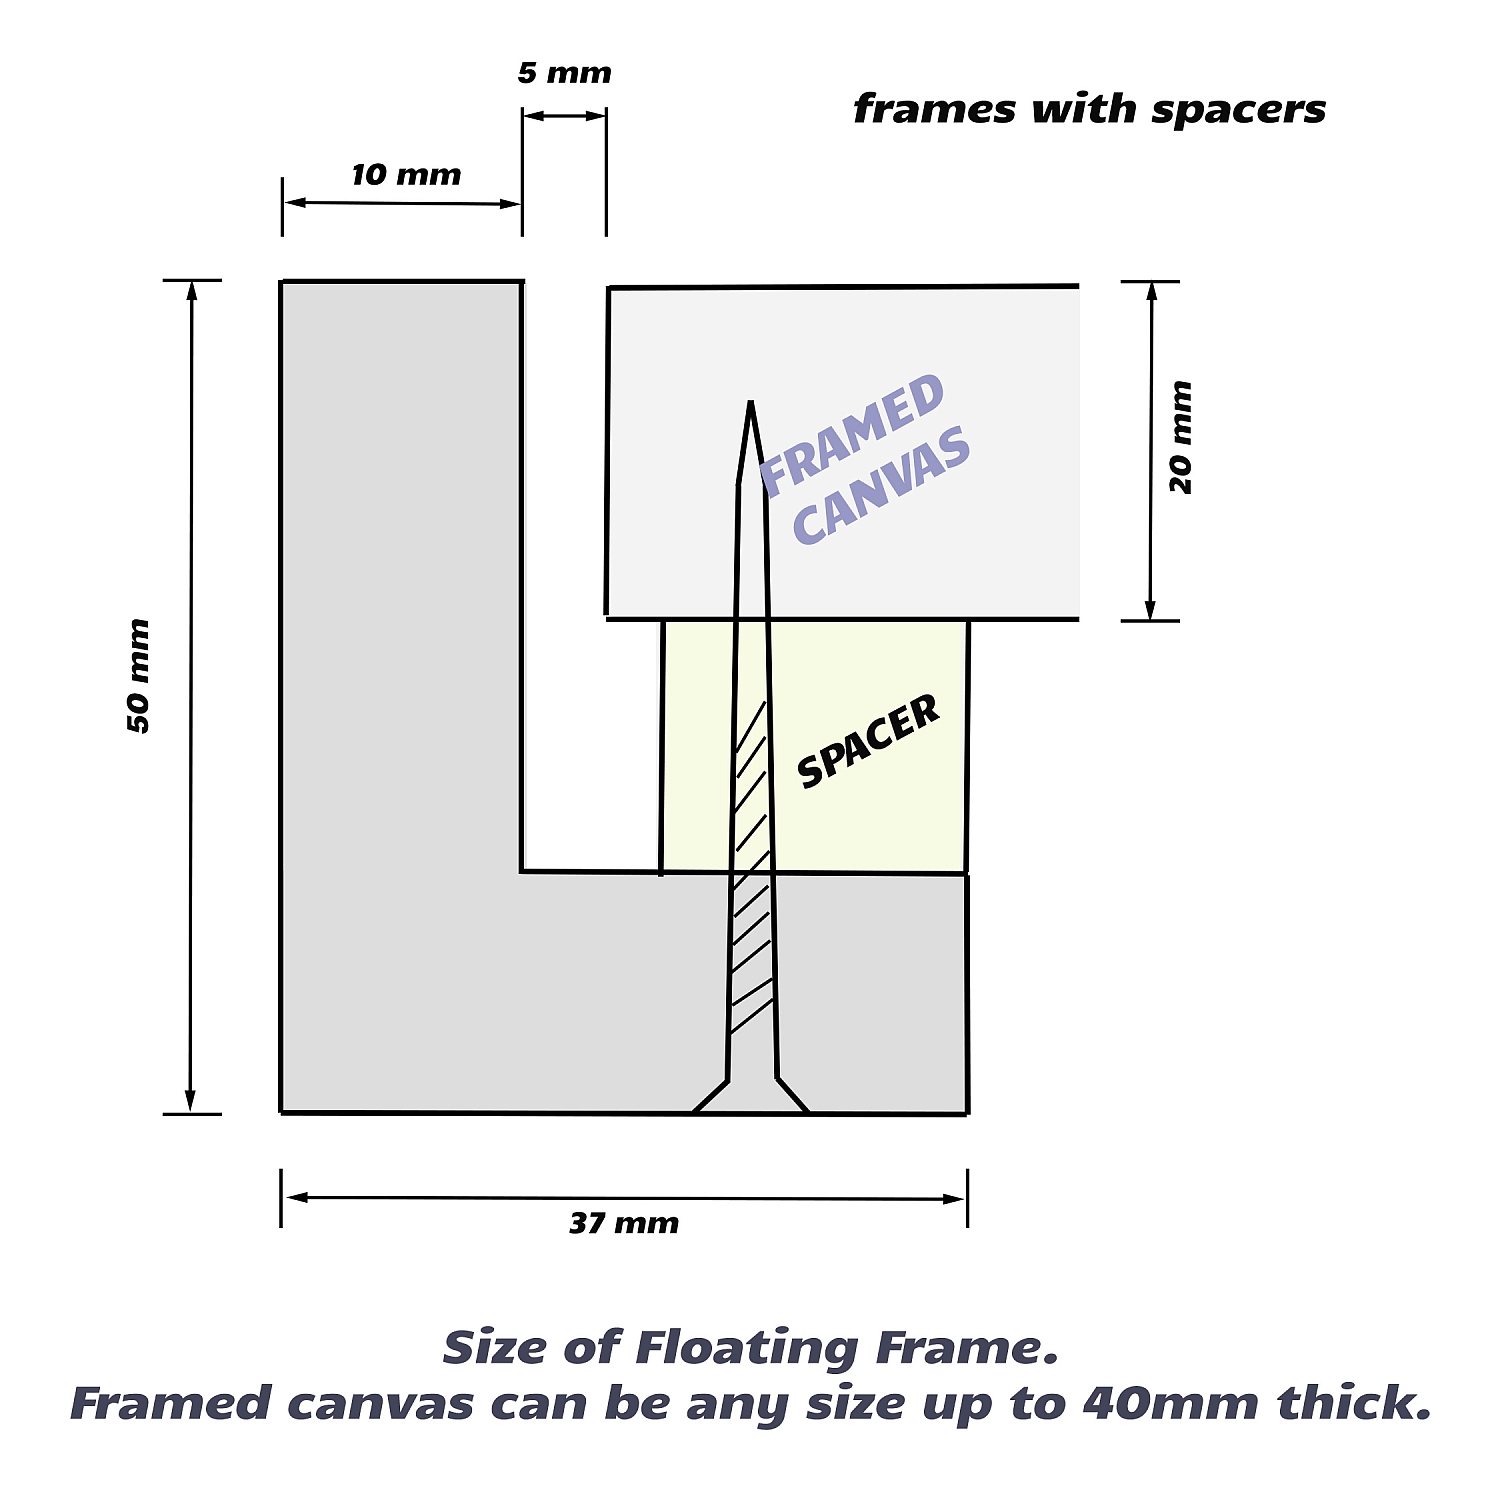 Prime - Float White Moulding Frame (Shadow Box Frame), DIY Canvas kit | Drawing_for_floating_frame_with_20mm_canvas.jpg